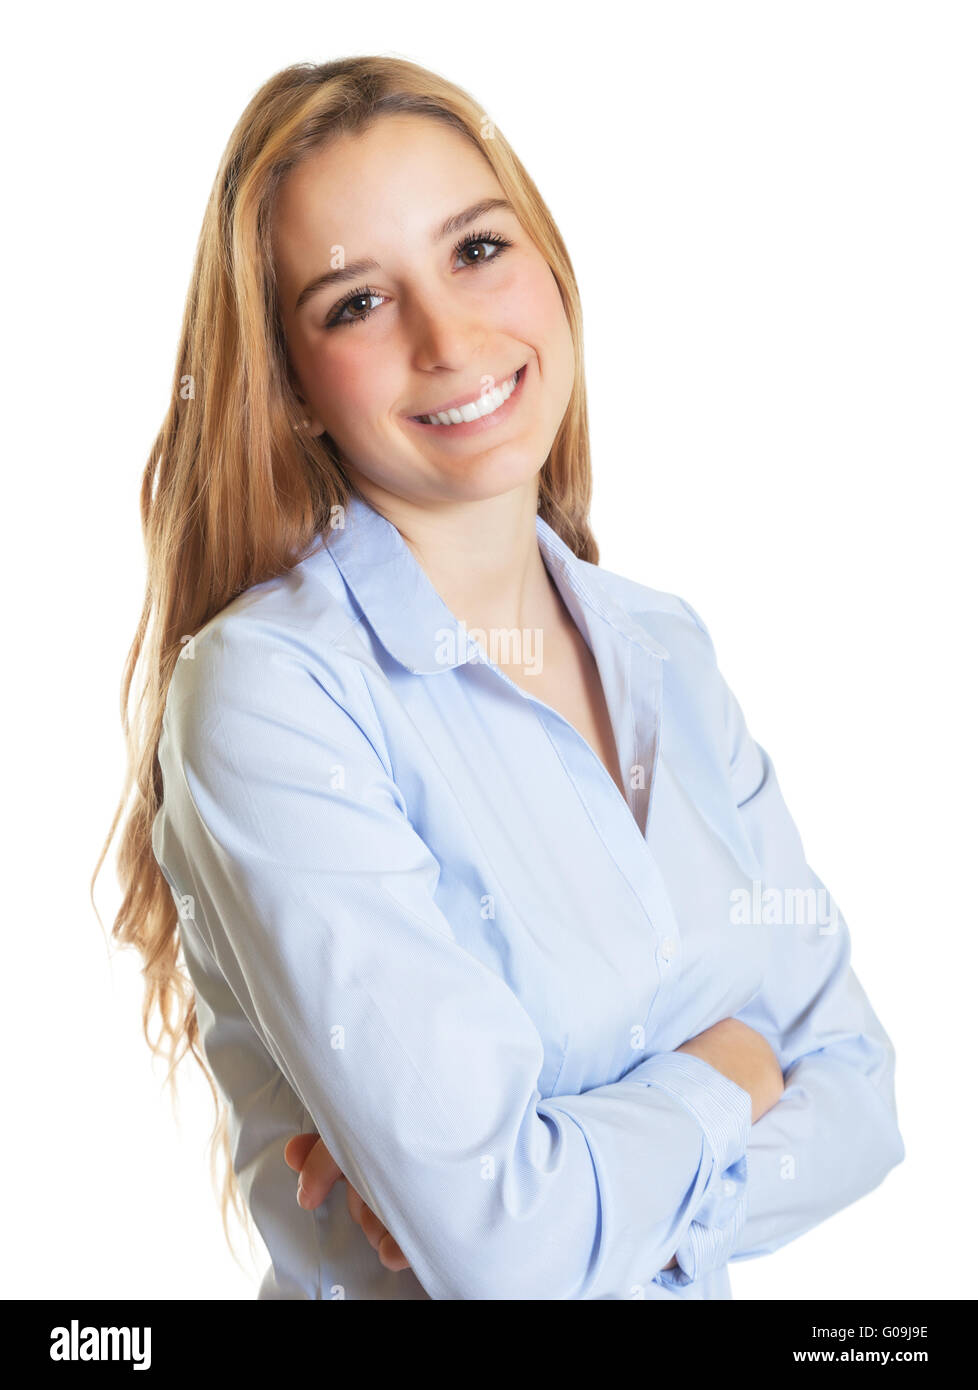 Female secretary with blond hair and crossed arms Stock Photo